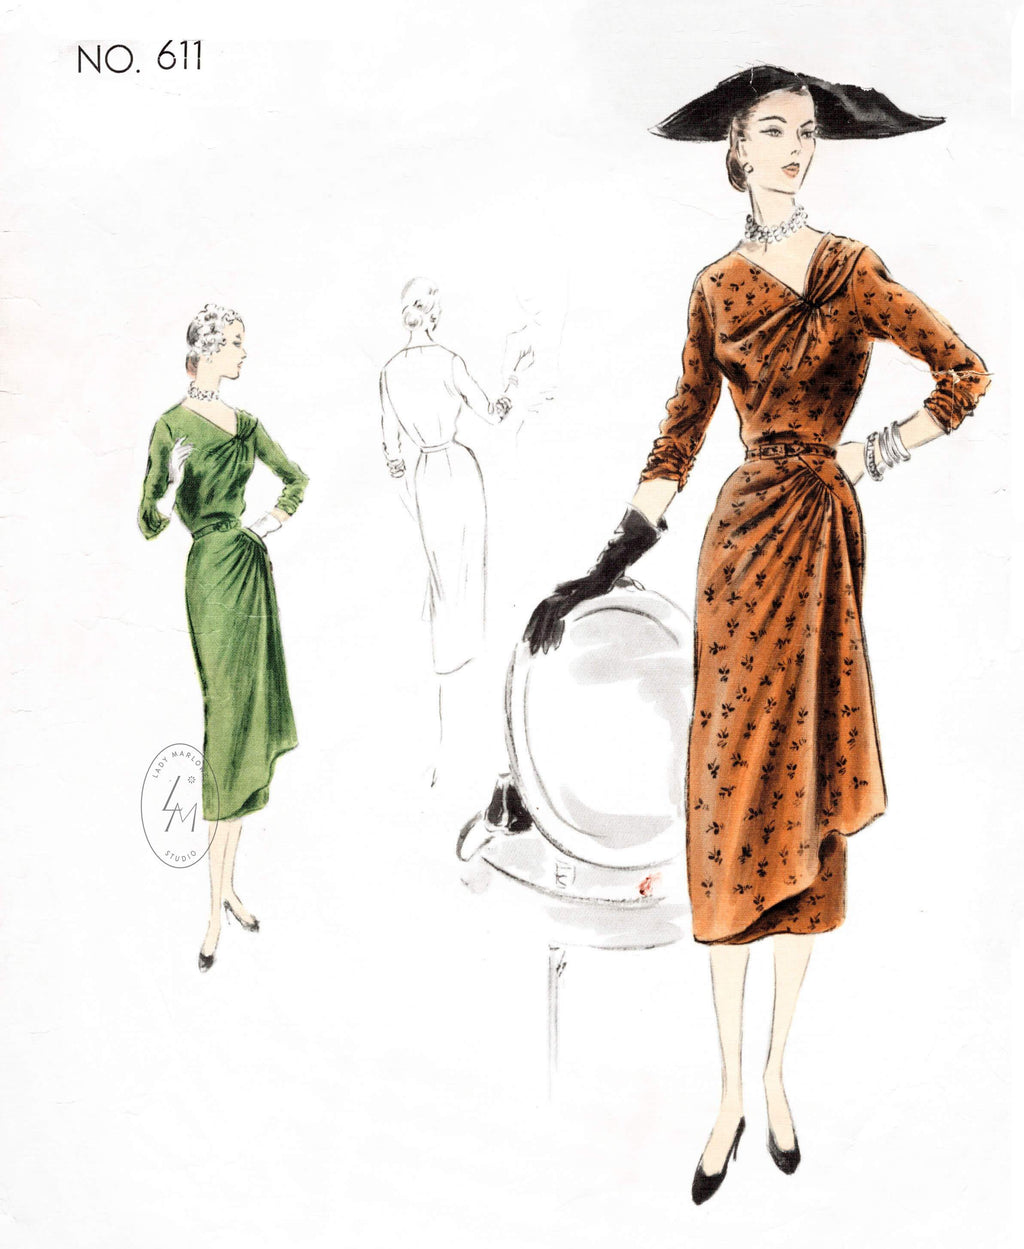 Shop 1940s 1950s dress patterns vintage sewing patterns gowns – Lady Marlowe